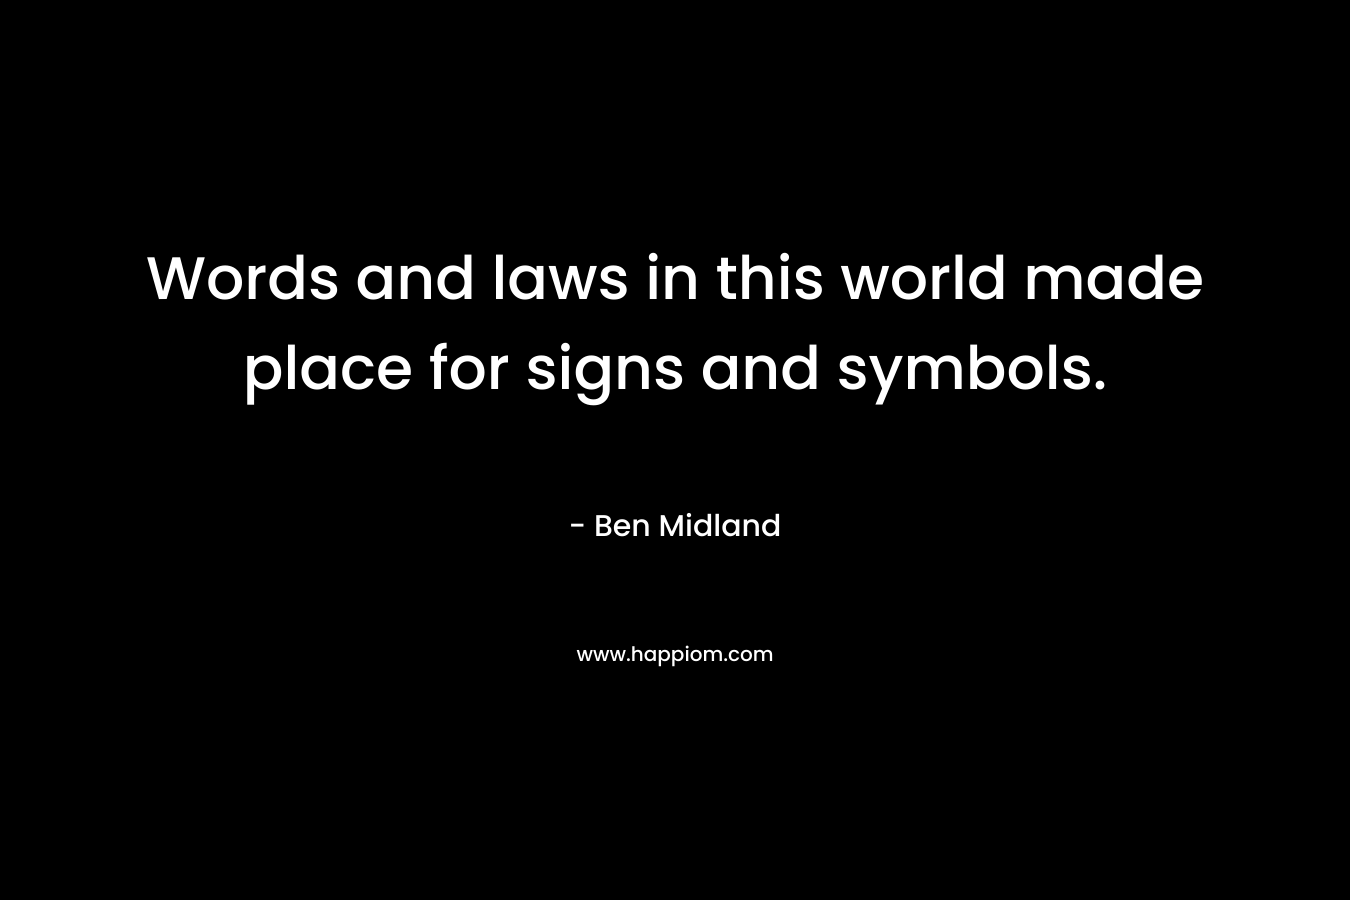 Words and laws in this world made place for signs and symbols. – Ben Midland